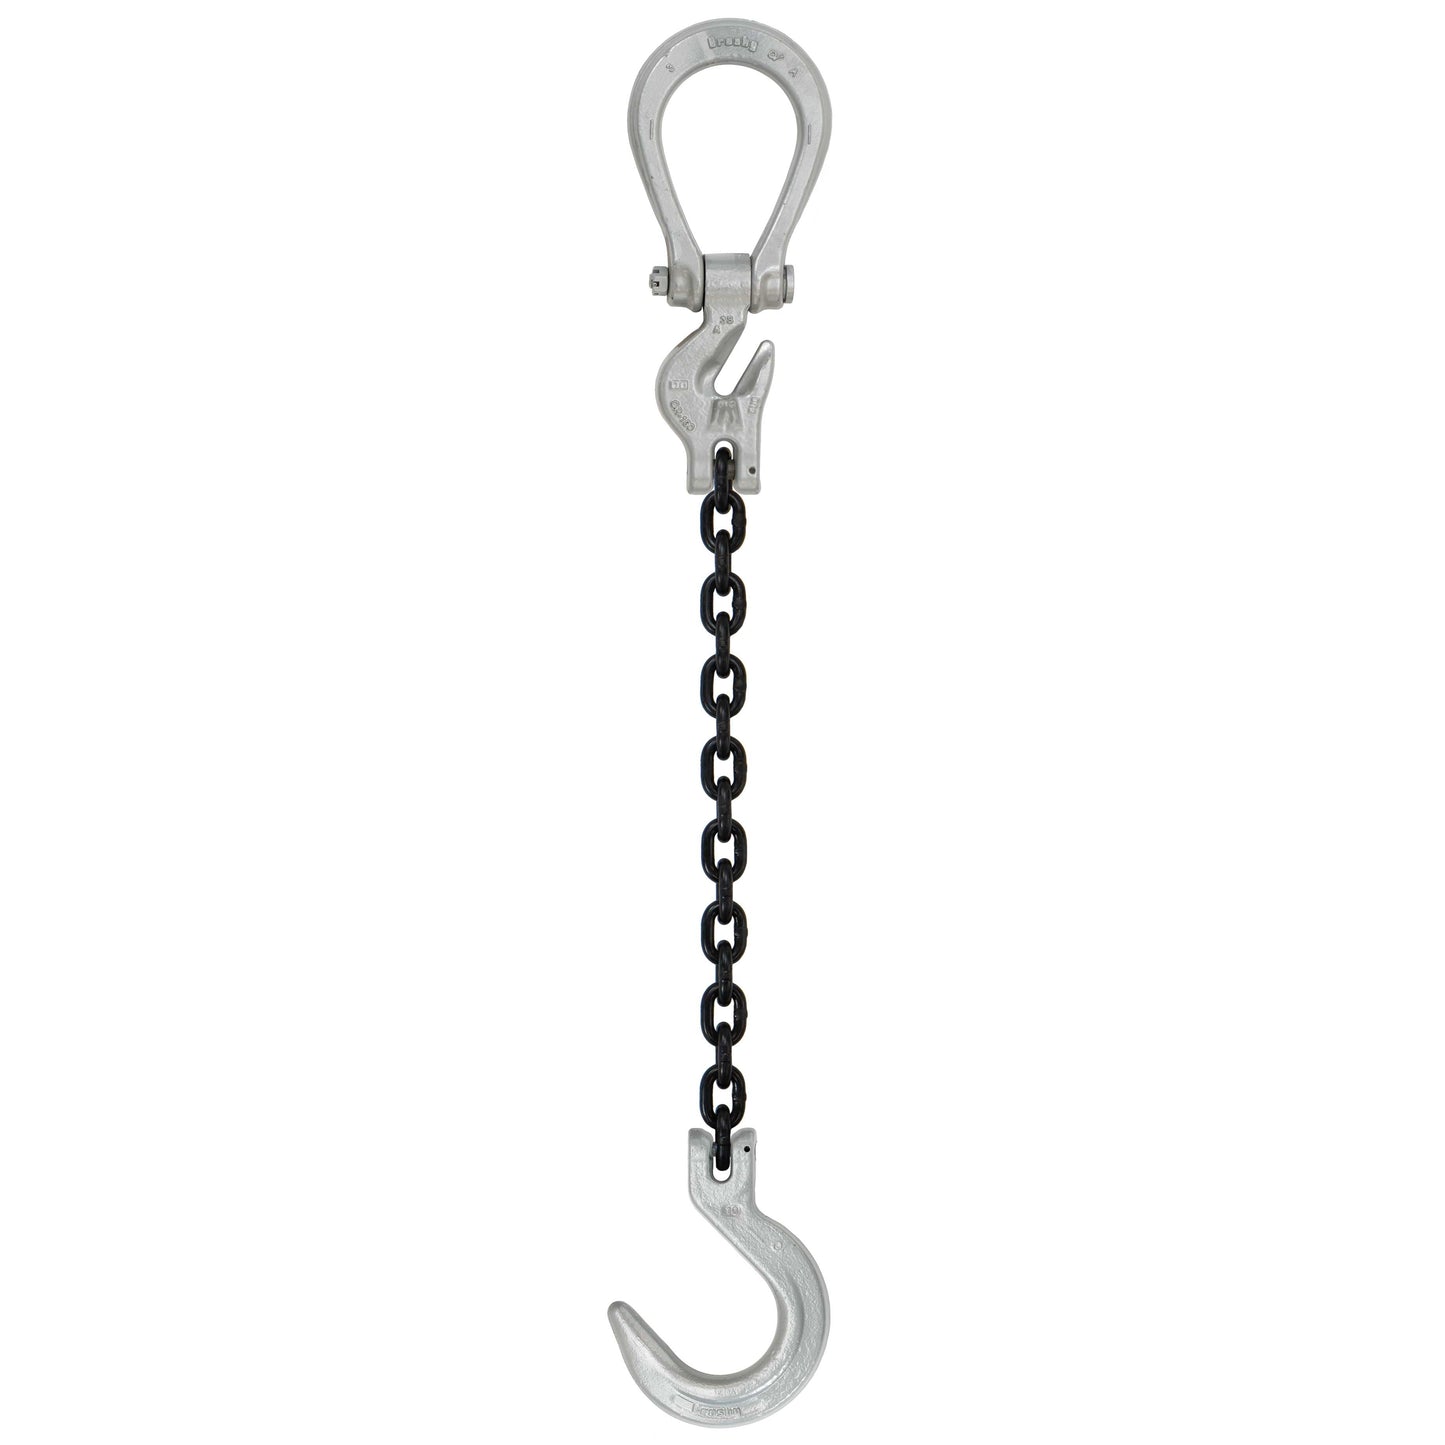 516 inch x 20 foot Domestic Adjustable Single Leg Chain Sling w Crosby Foundry Hook Grade 100 image 1 of 2